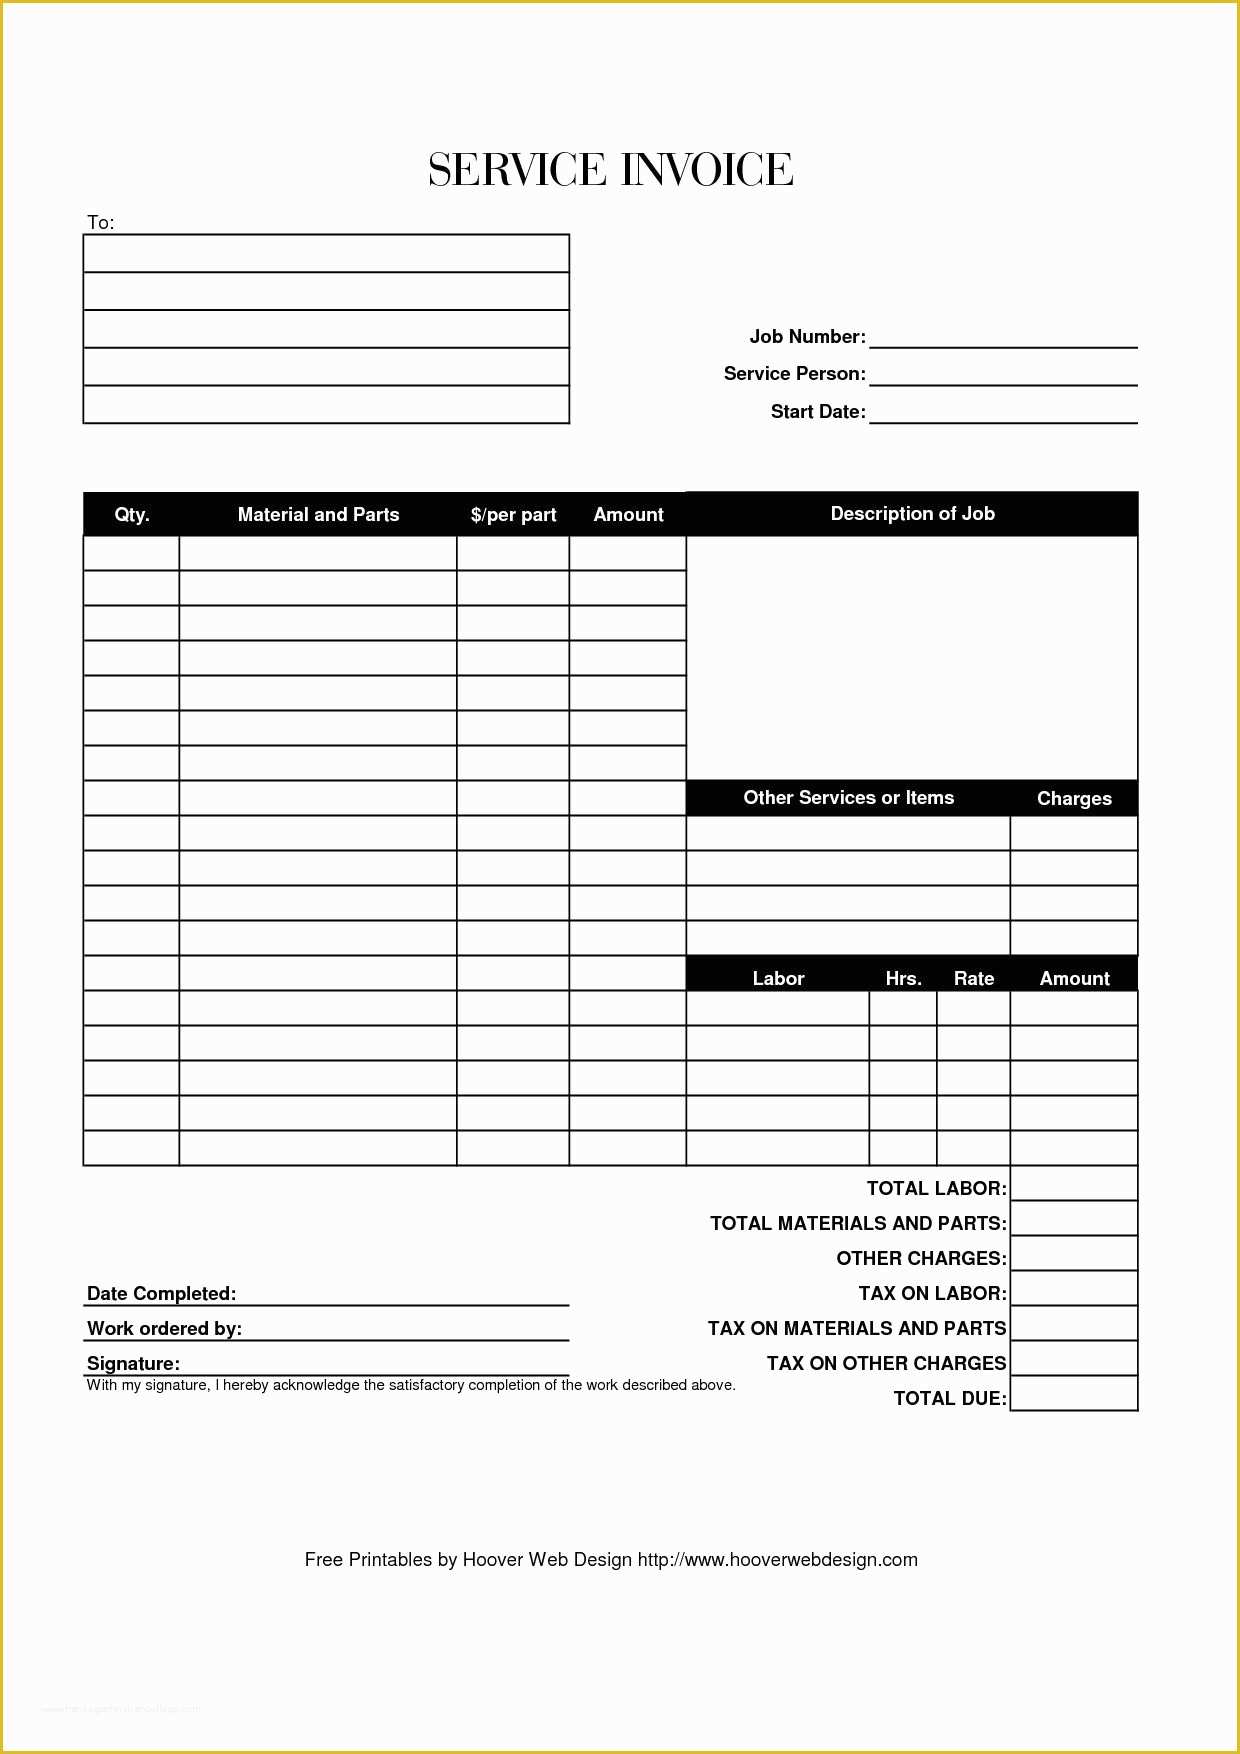 Free Online Receipt Template Of Free Printable Invoice Template 10 Printable Invoice